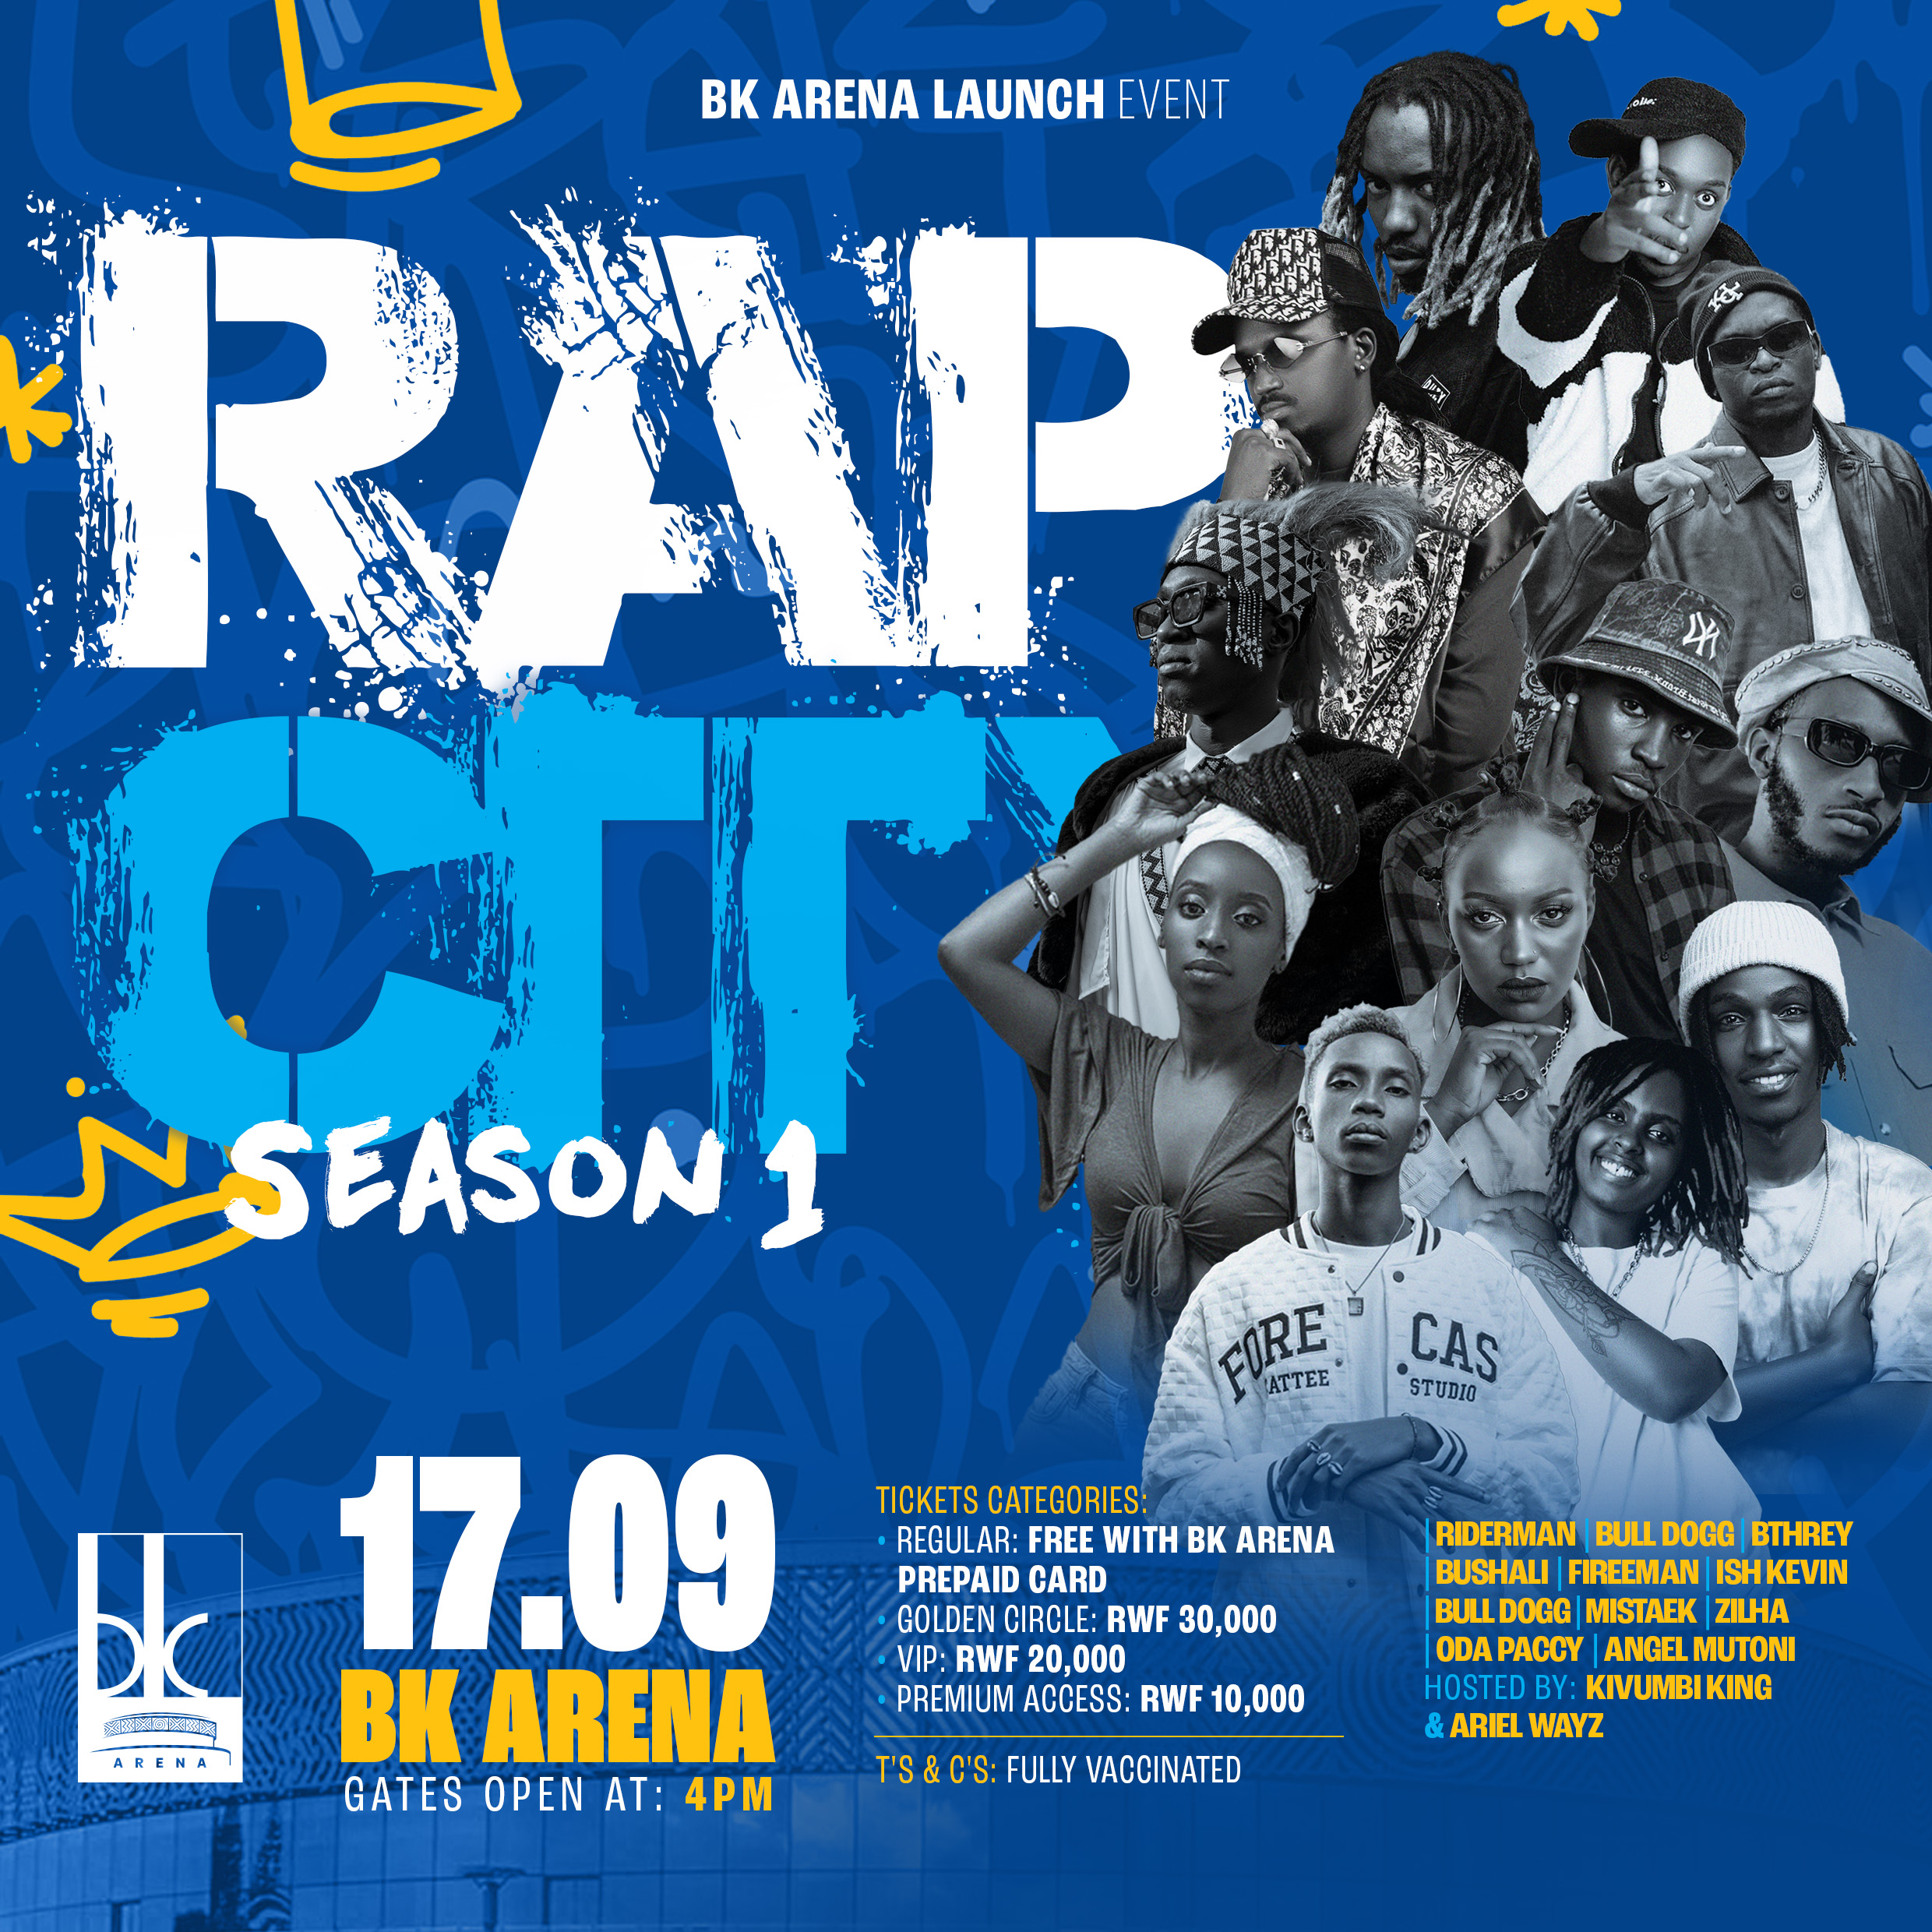 BK Group Launches “Rap City Season 1” To Promote Young Music Talent